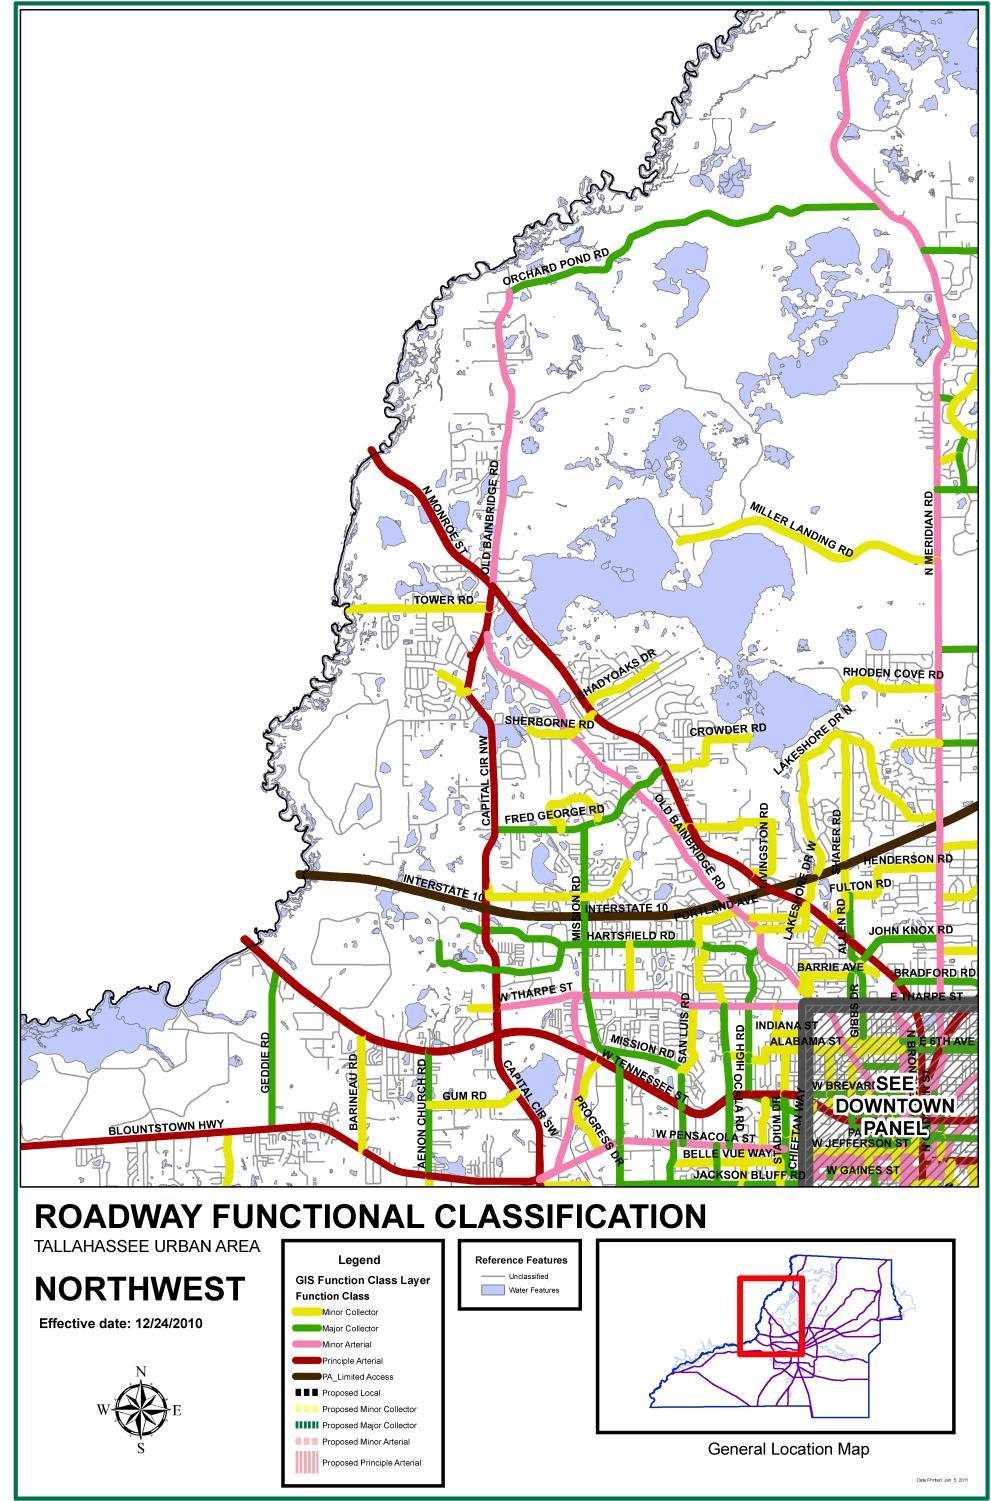 Map 24: Roadway Functional Classification,